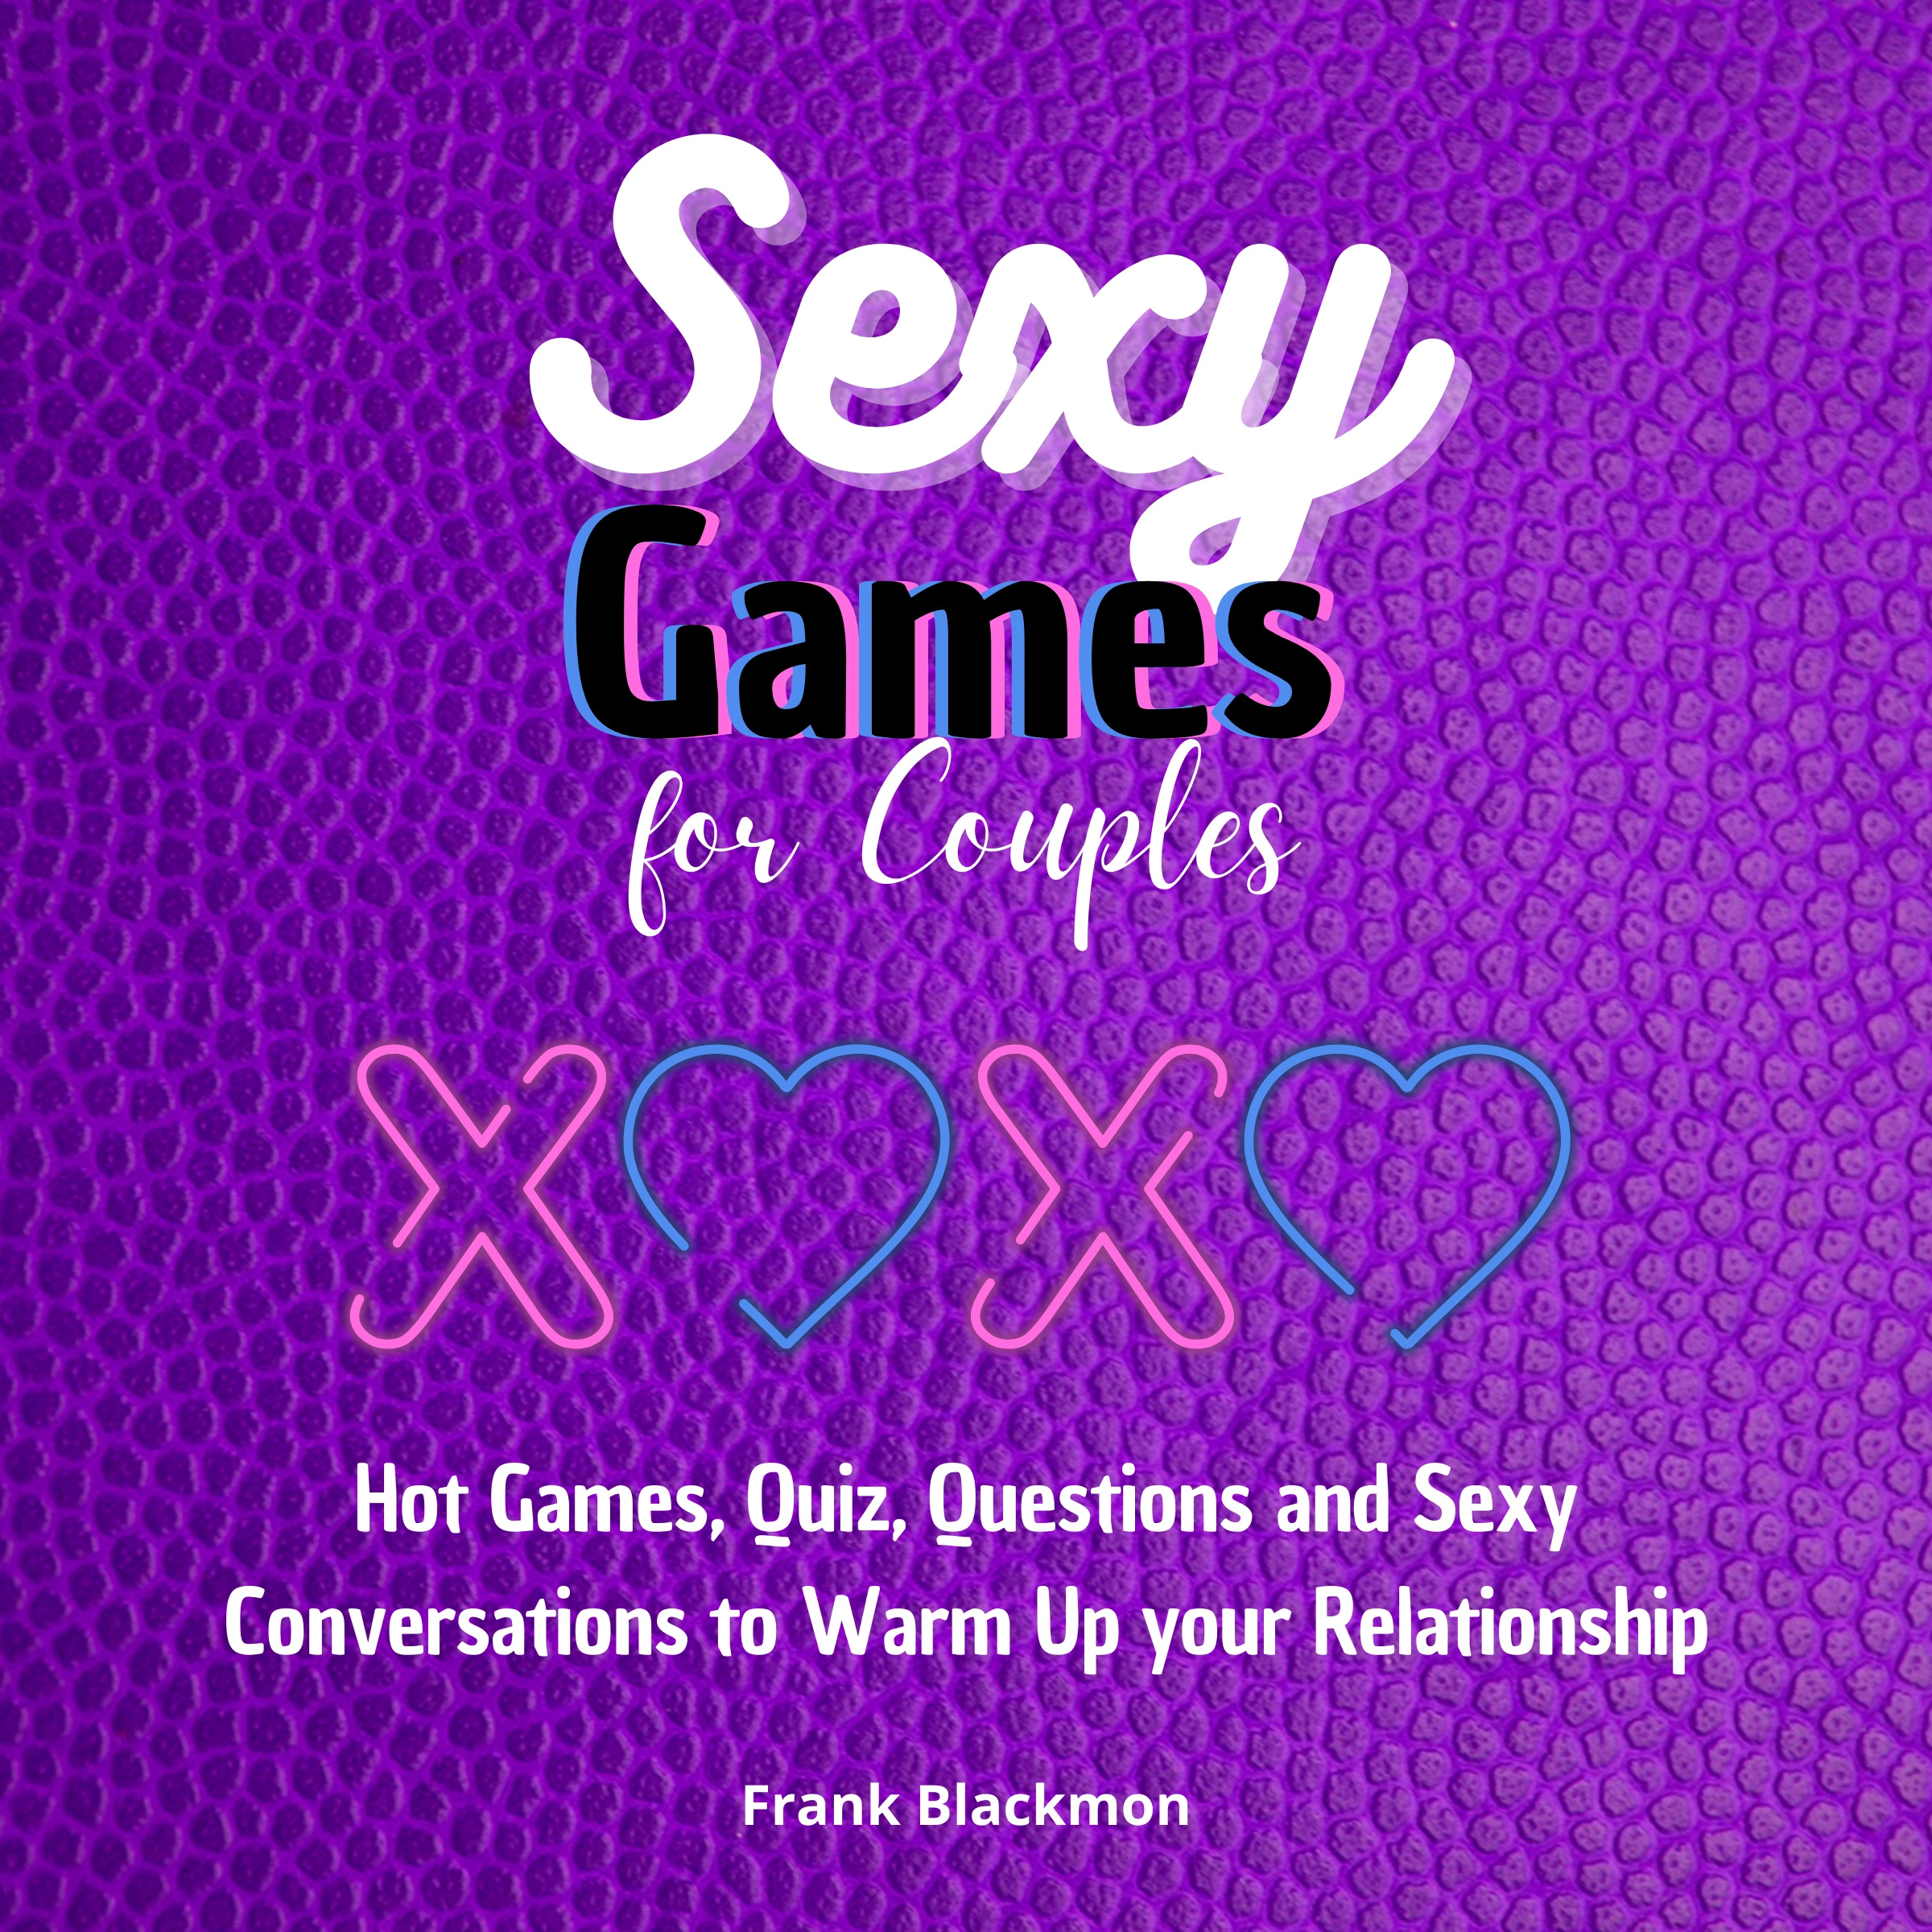 Sexy Games For Couples Audiobook by Frank Blackmon